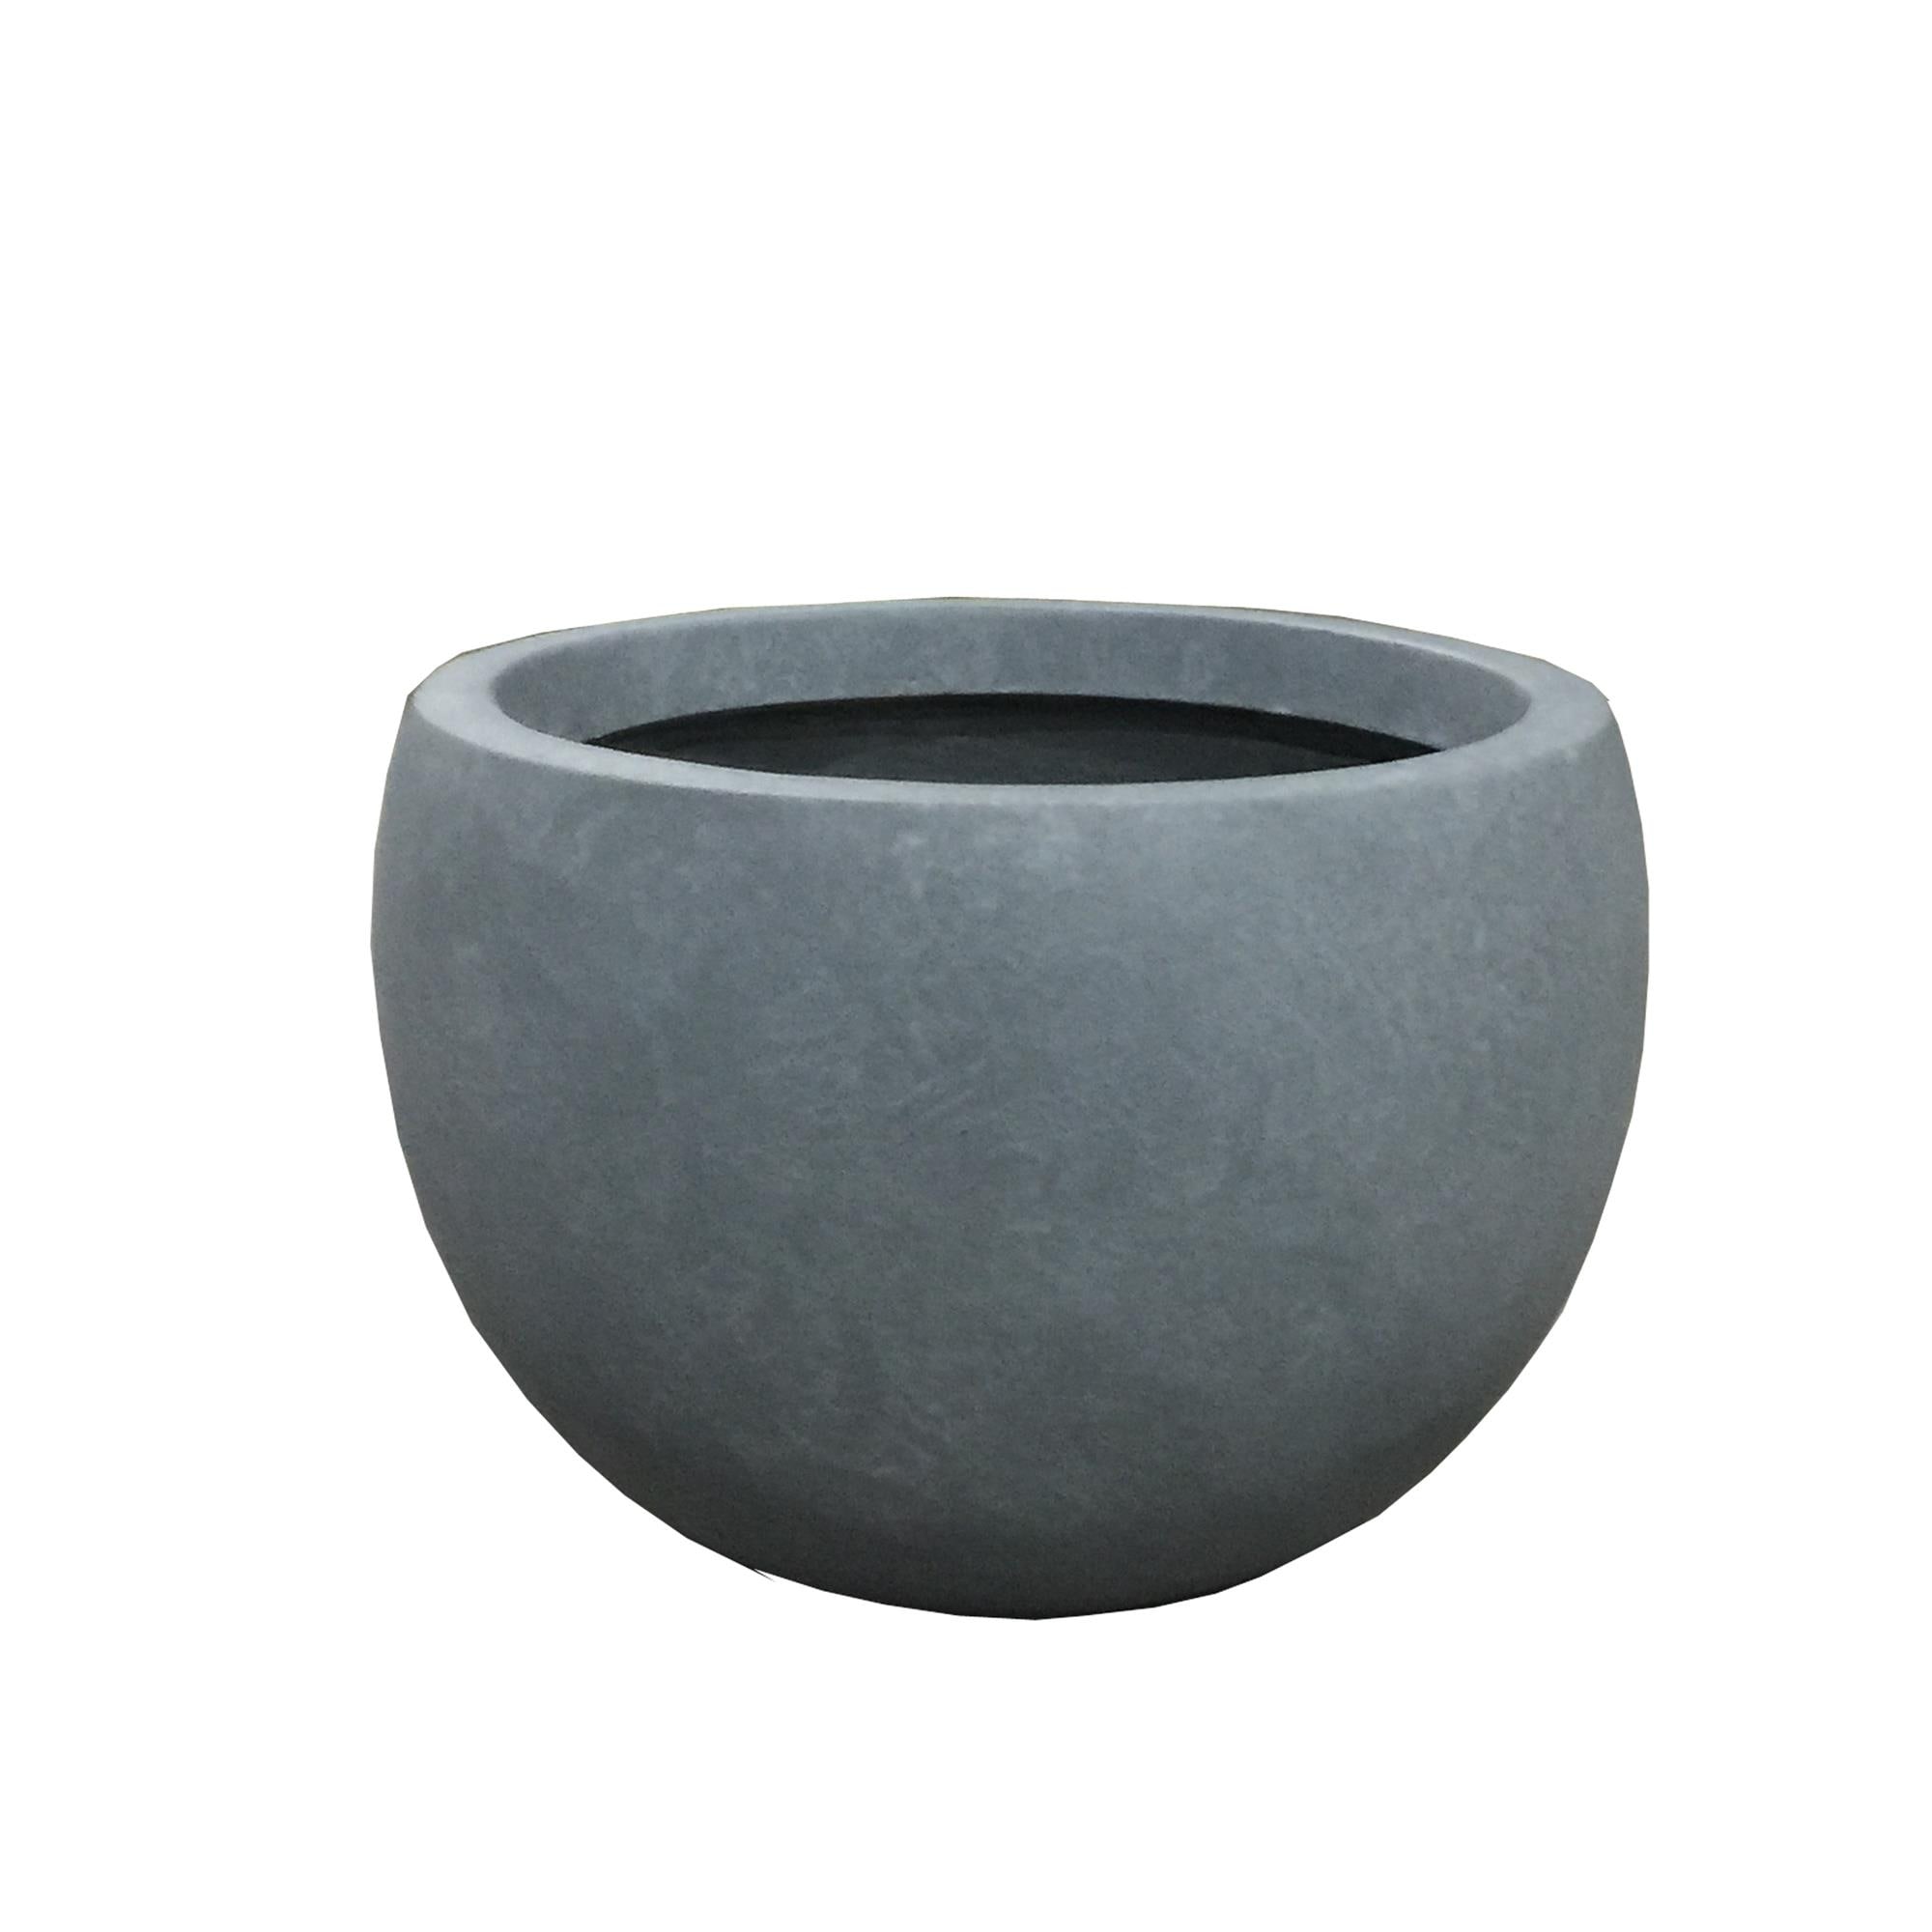 Kante 21.7 H Weathered Concrete Tall Planter, Large Outdoor Indoor  Decorative Pot with Drainage Hole and Rubber Plug, Modern Round Style for  Home and